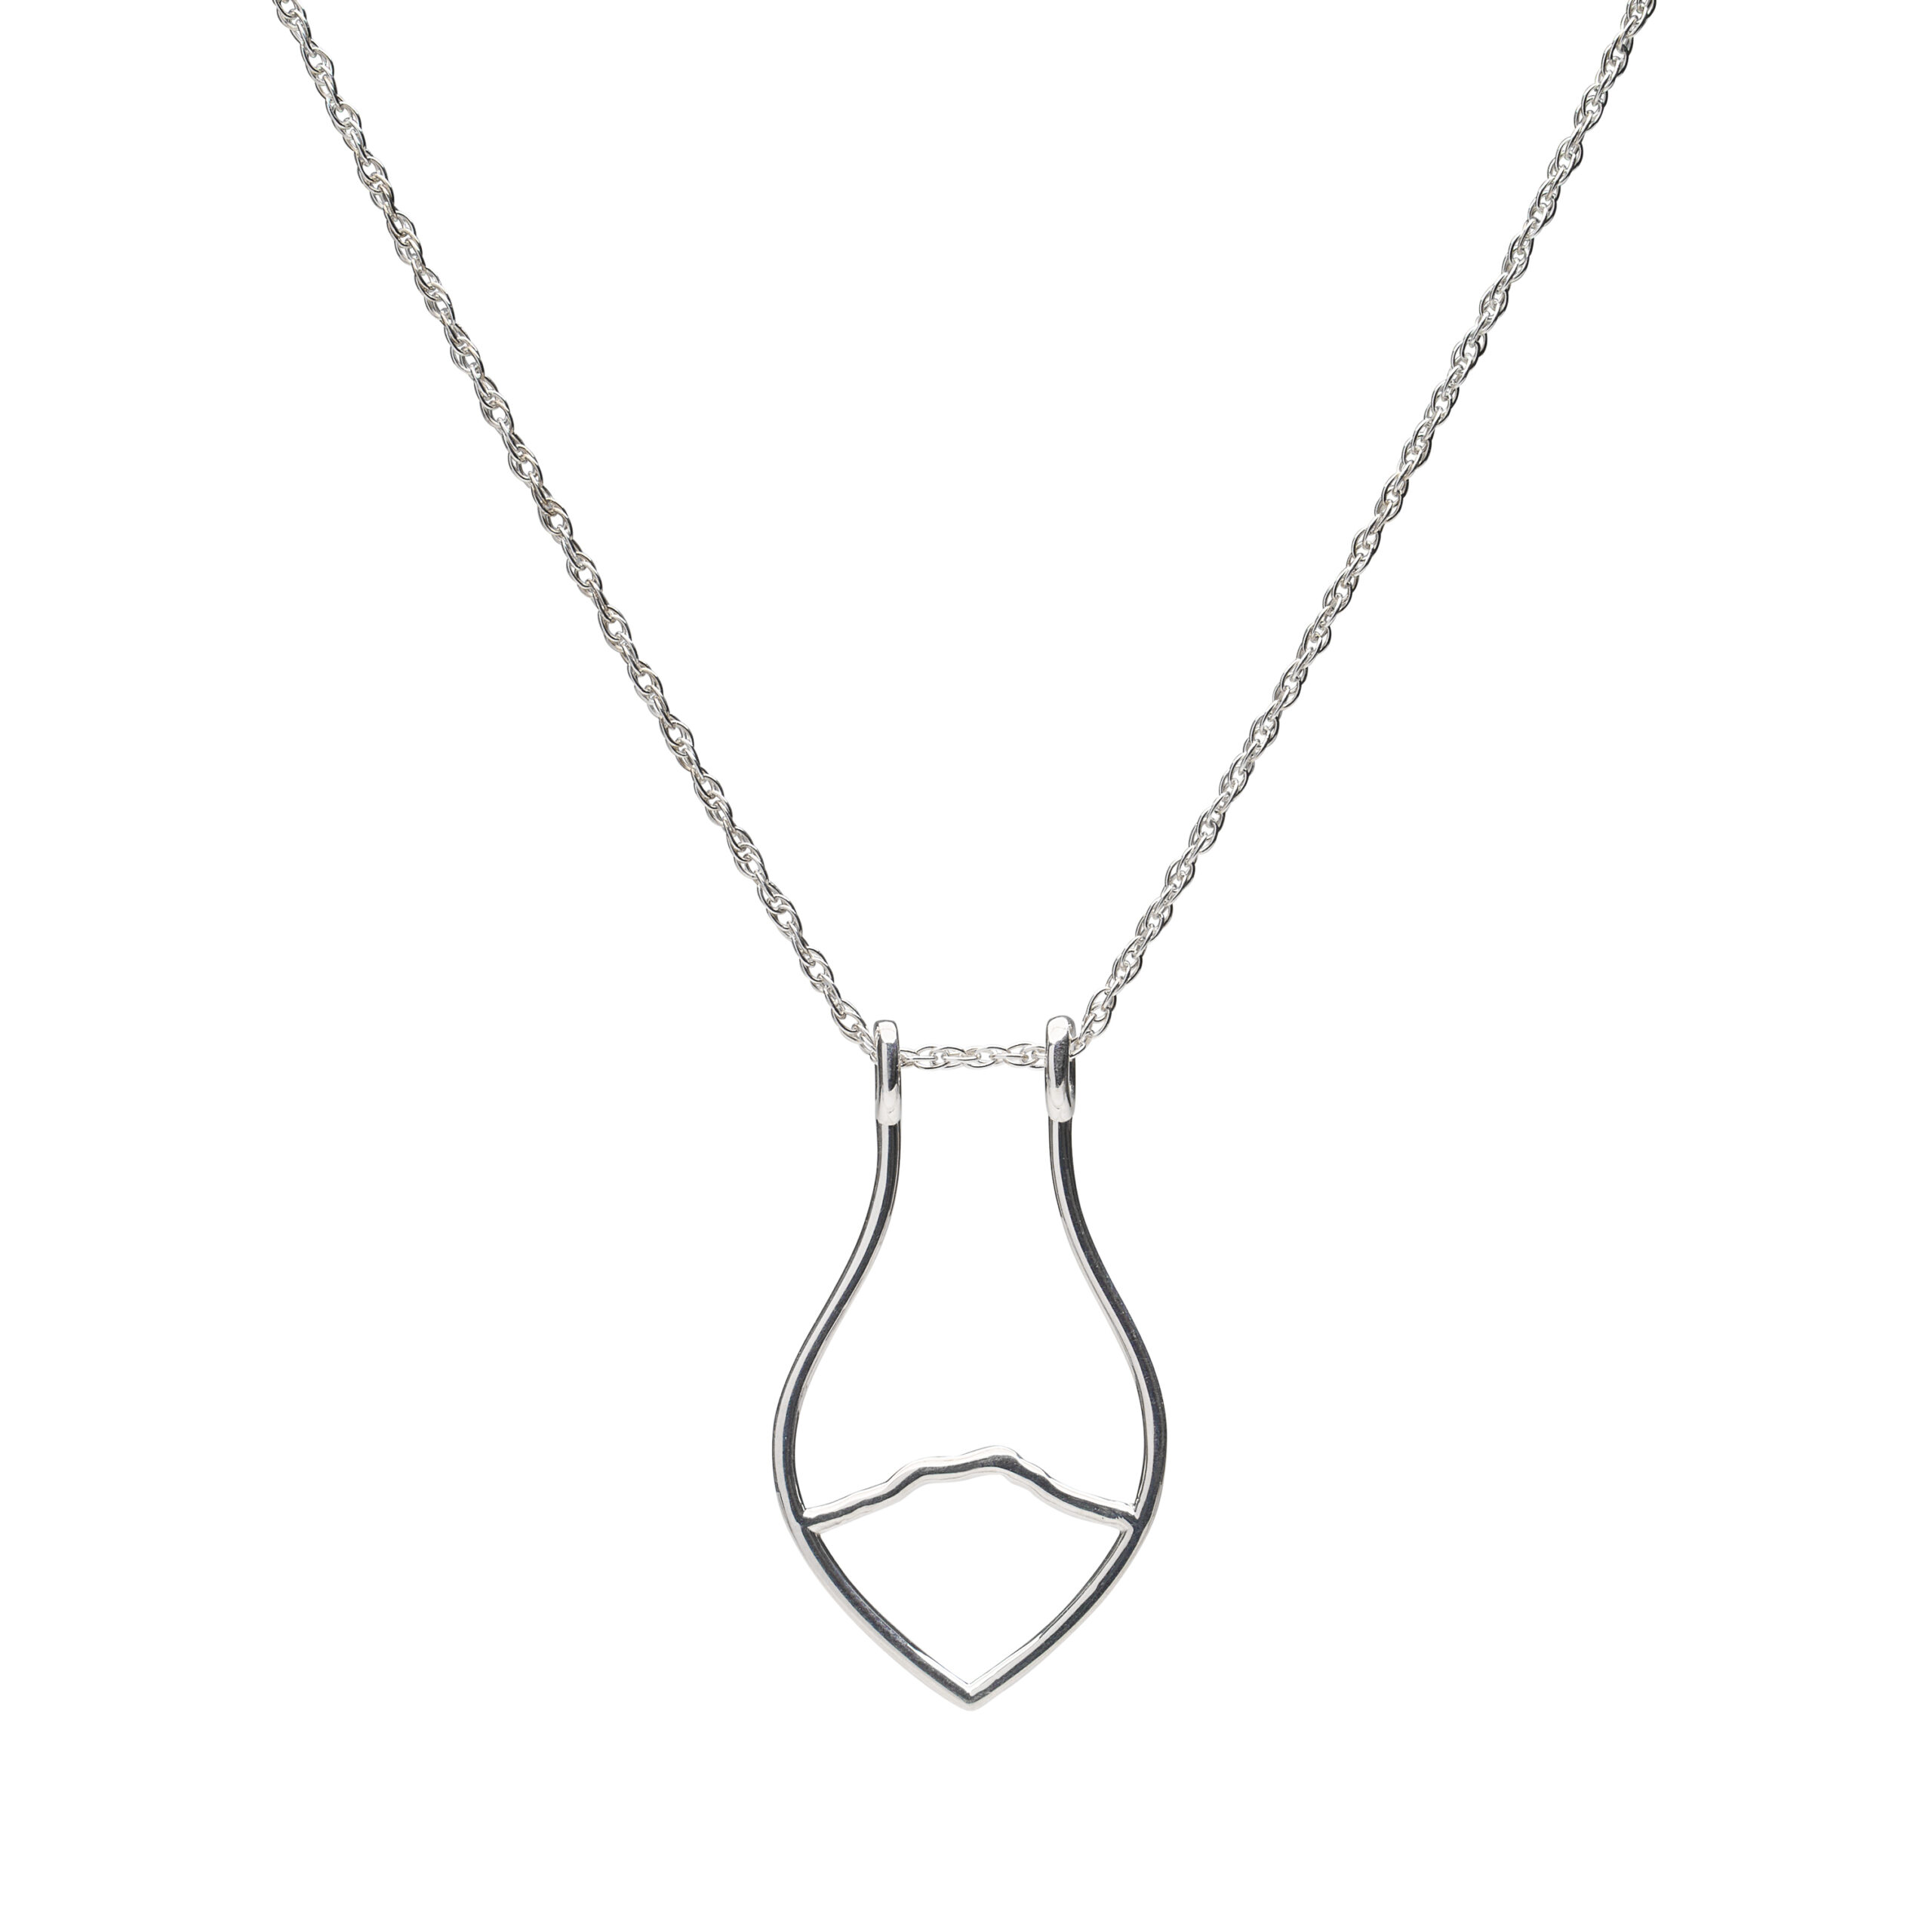 Ring holder necklace with the outline of Camel's Hump in the middle